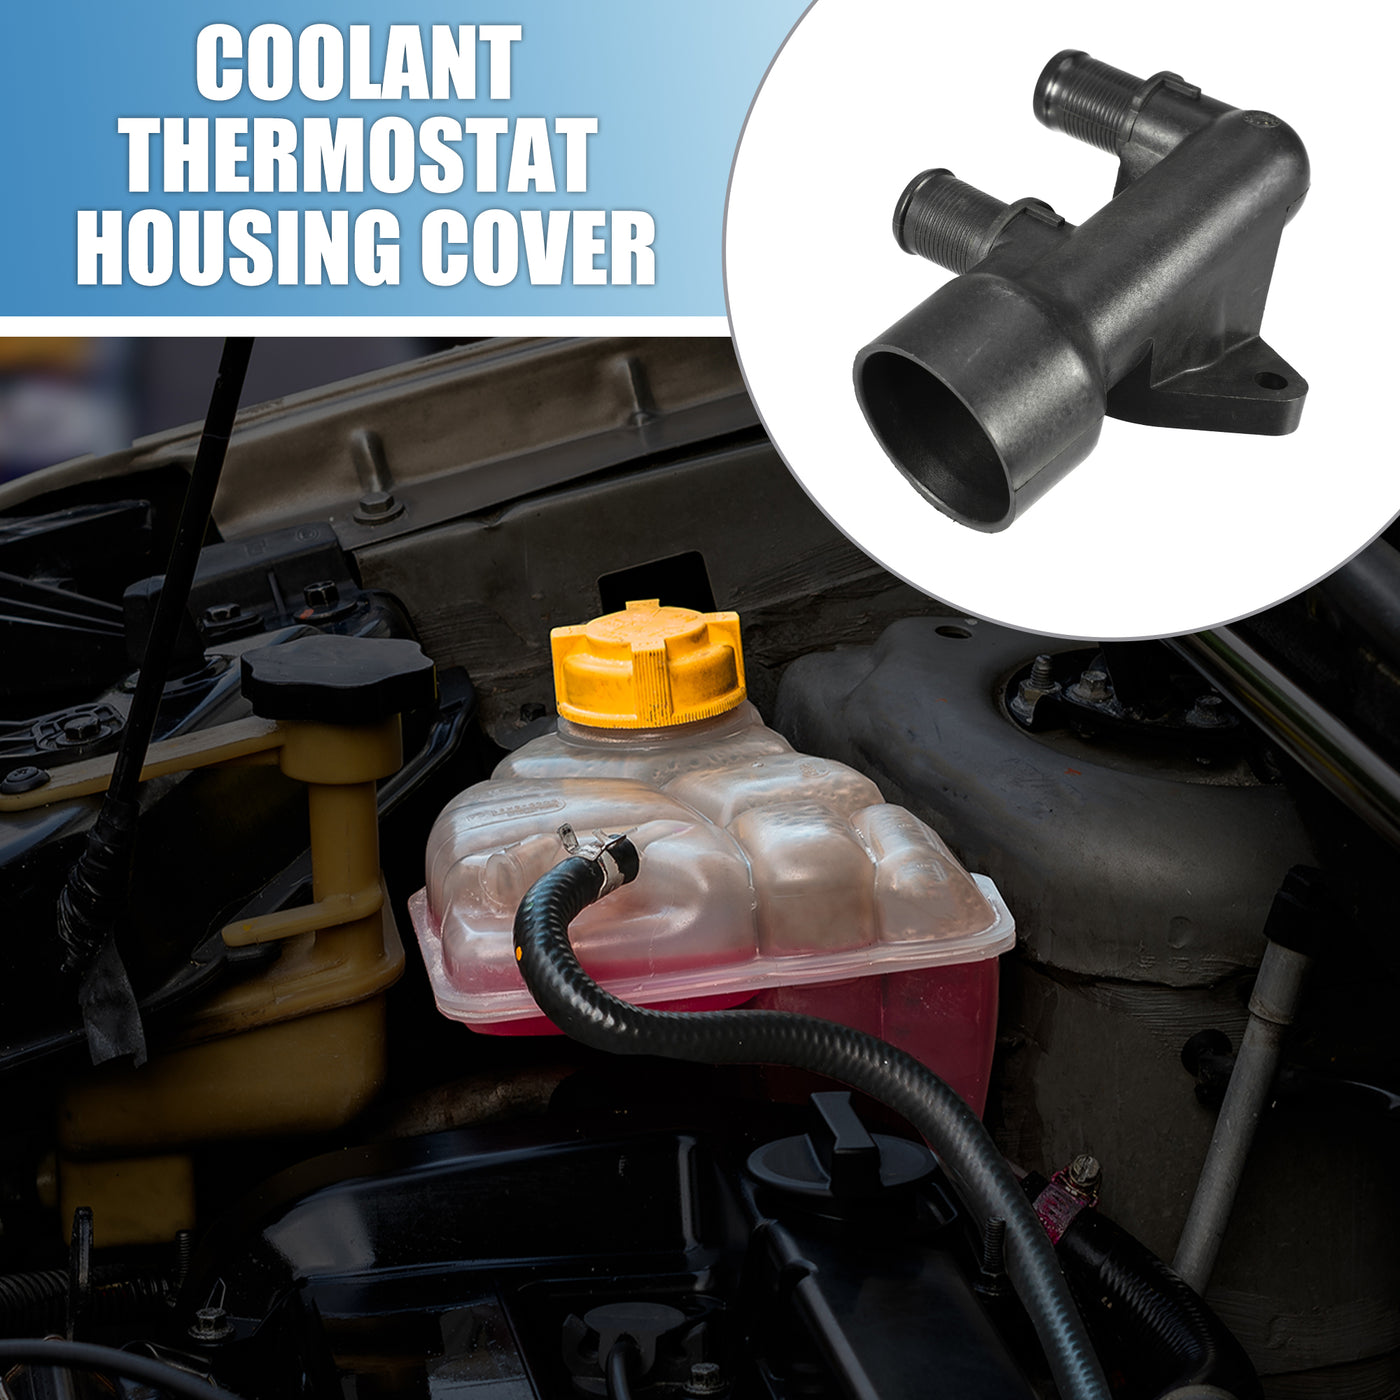 A ABSOPRO Coolant Thermostat Housing Cover N.1336N8 for Peugeot 206 306 Expert Partne Plastic Black